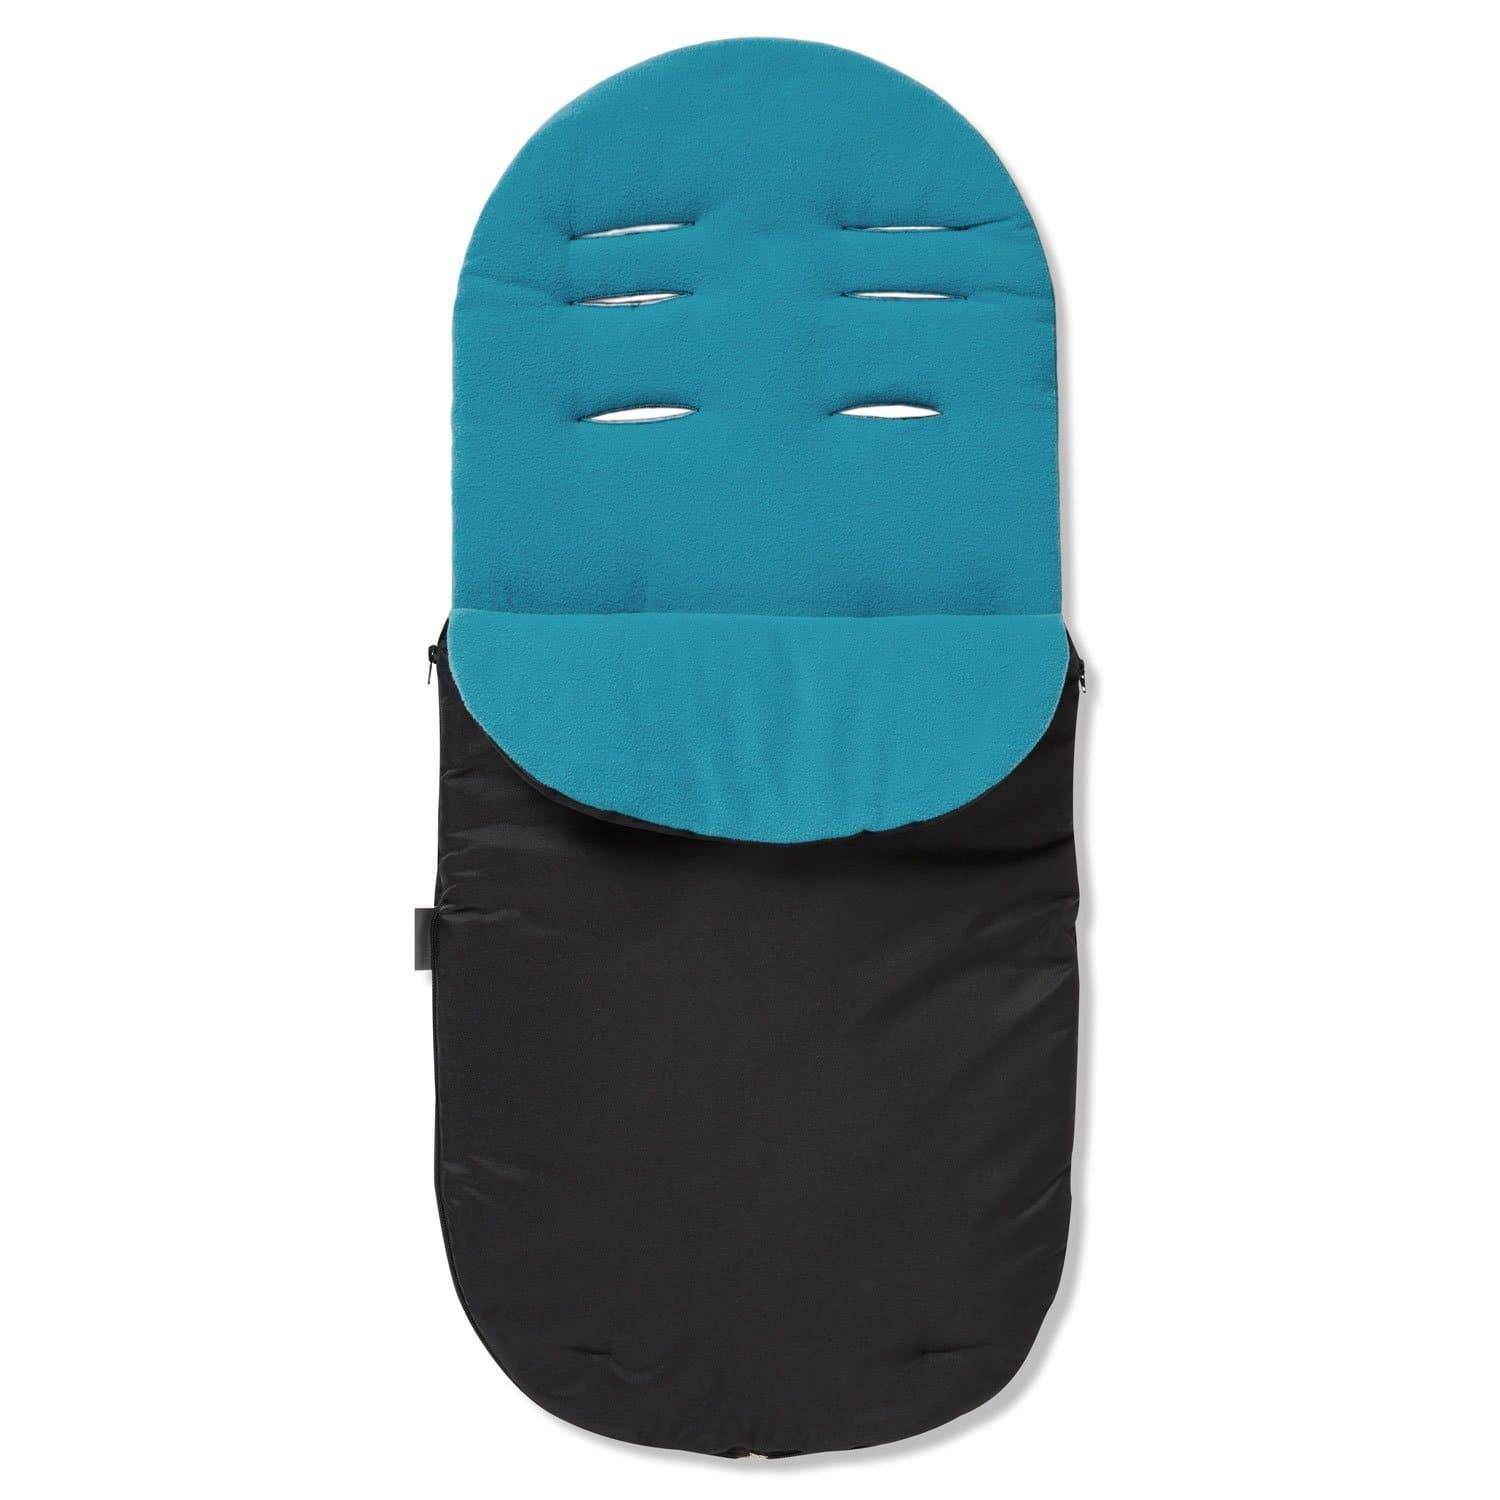 Footmuff / Cosy Toes Compatible with Cybex - Turquoise / Fits All Models | For Your Little One